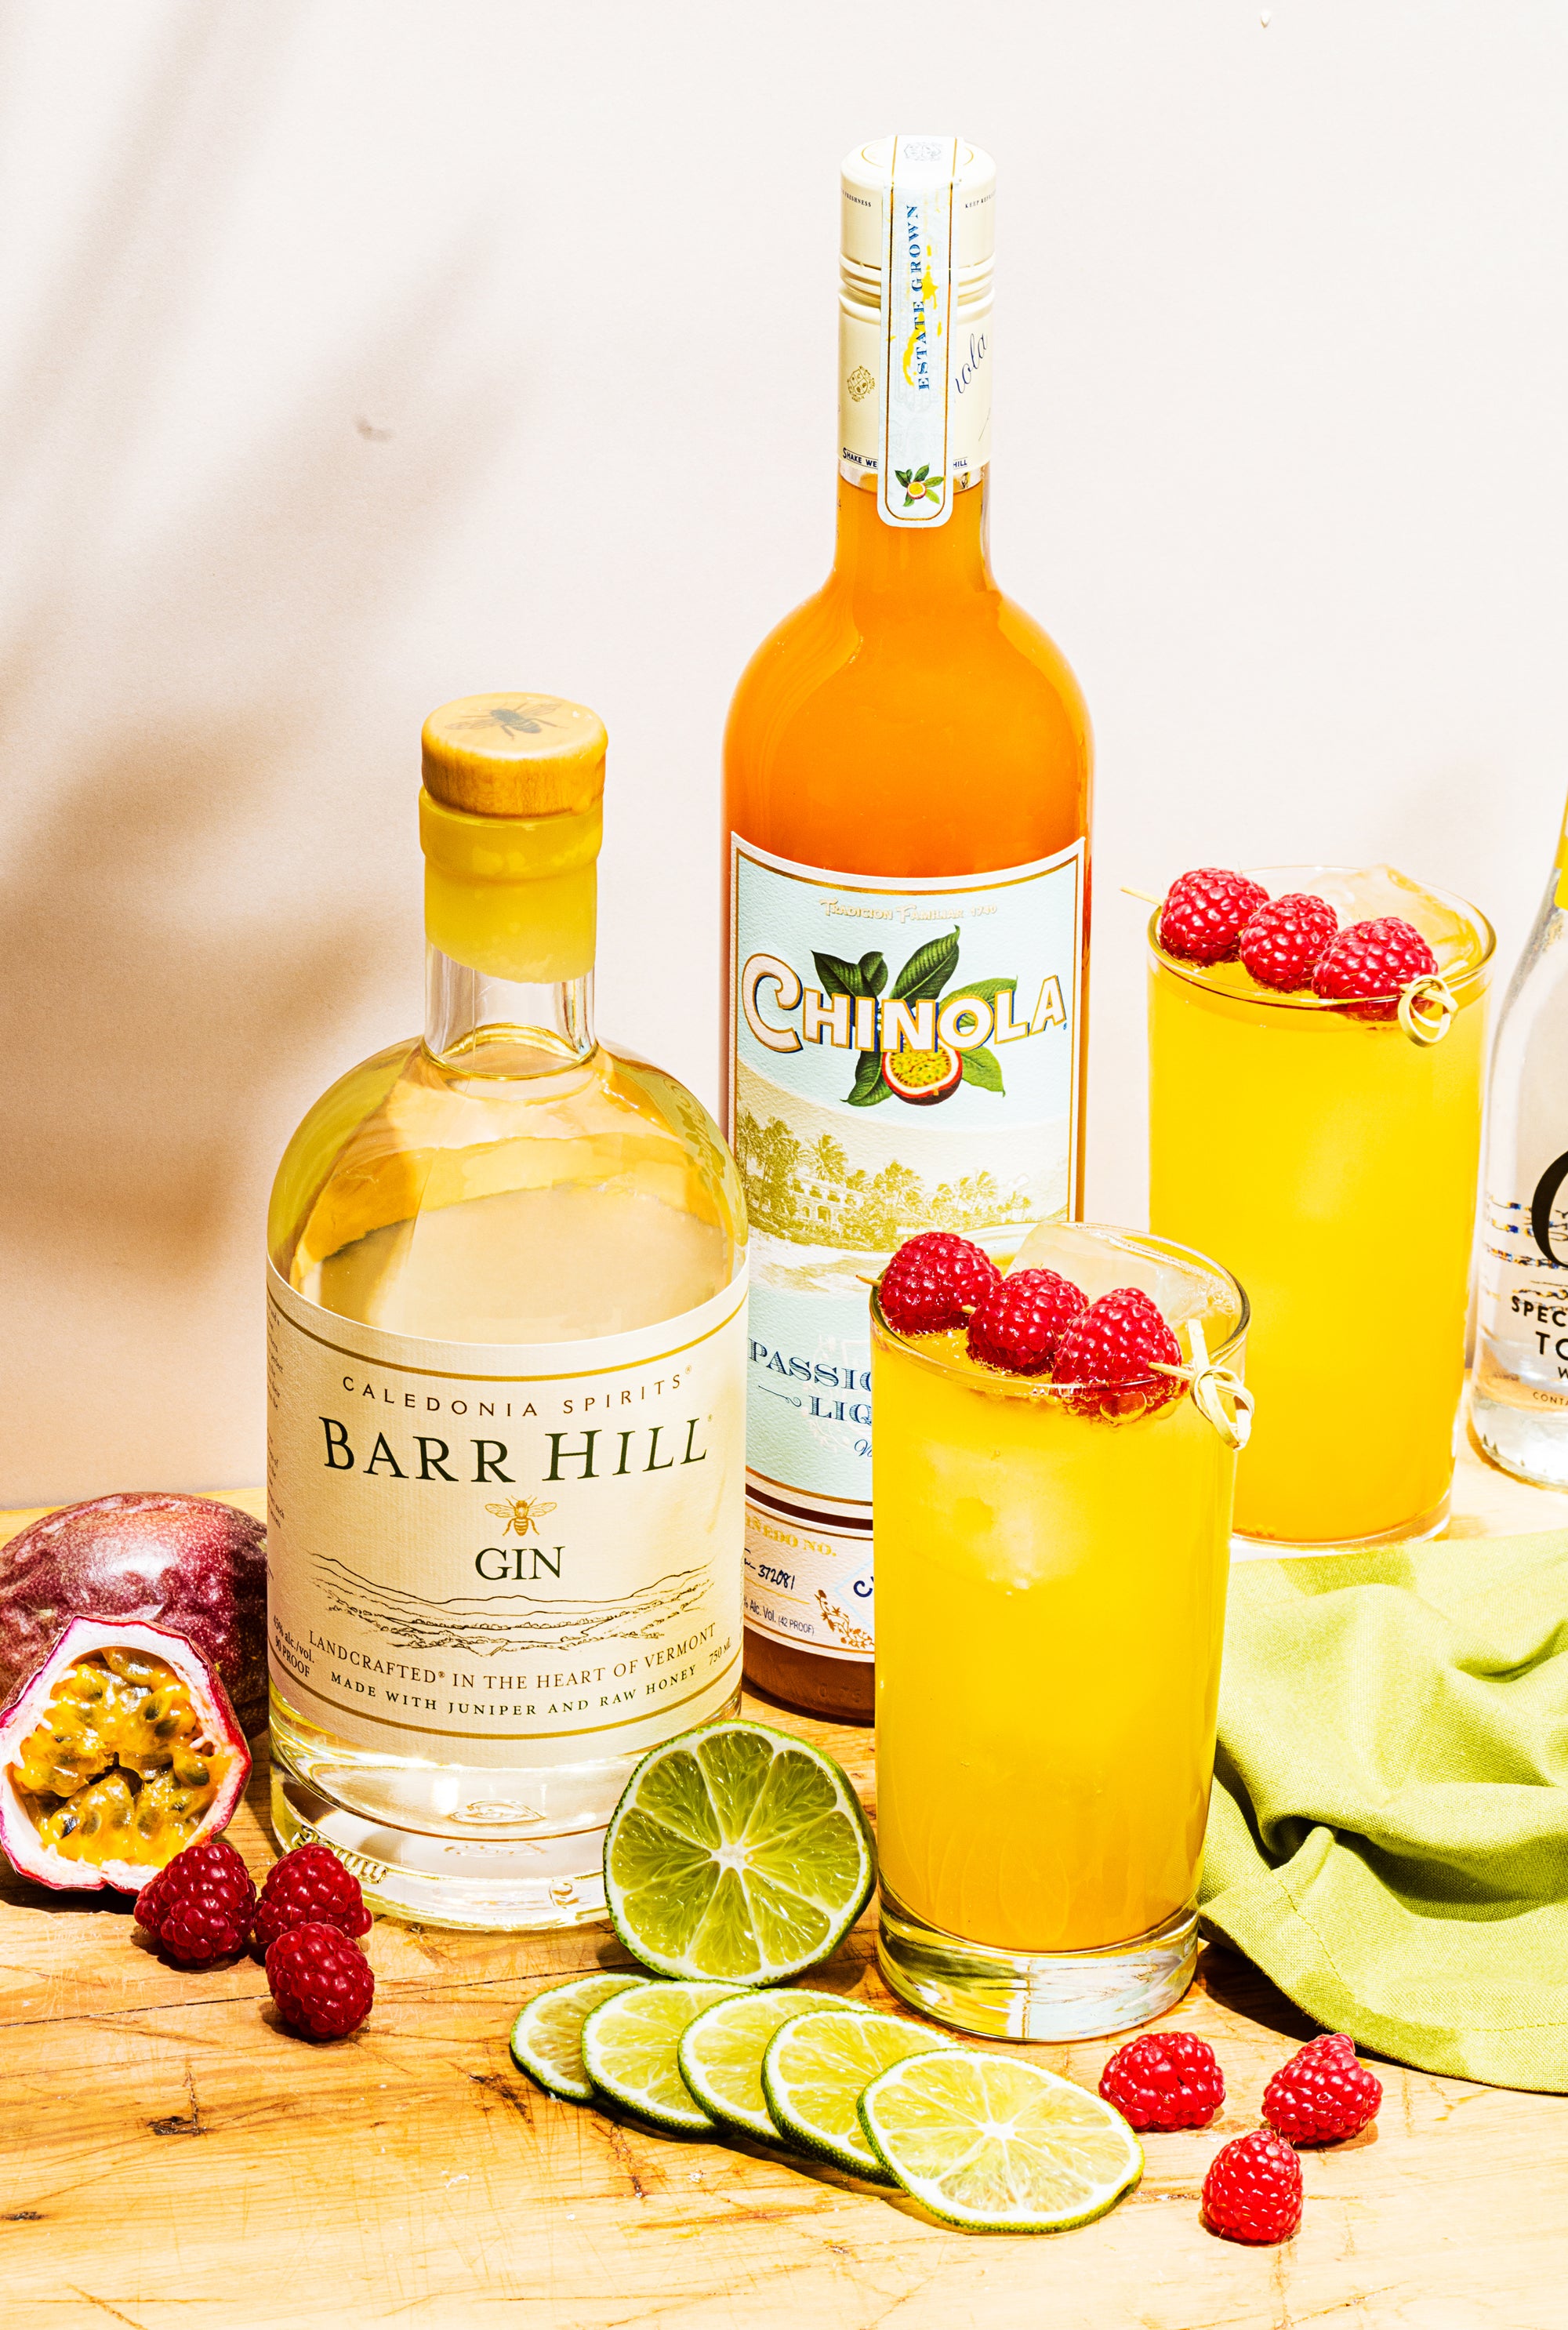 Tropic and Tonic Cocktails with bottles of Barr Hill Gin and Chinola, surrounded by slices of lime, raspberries, and passionfruit.